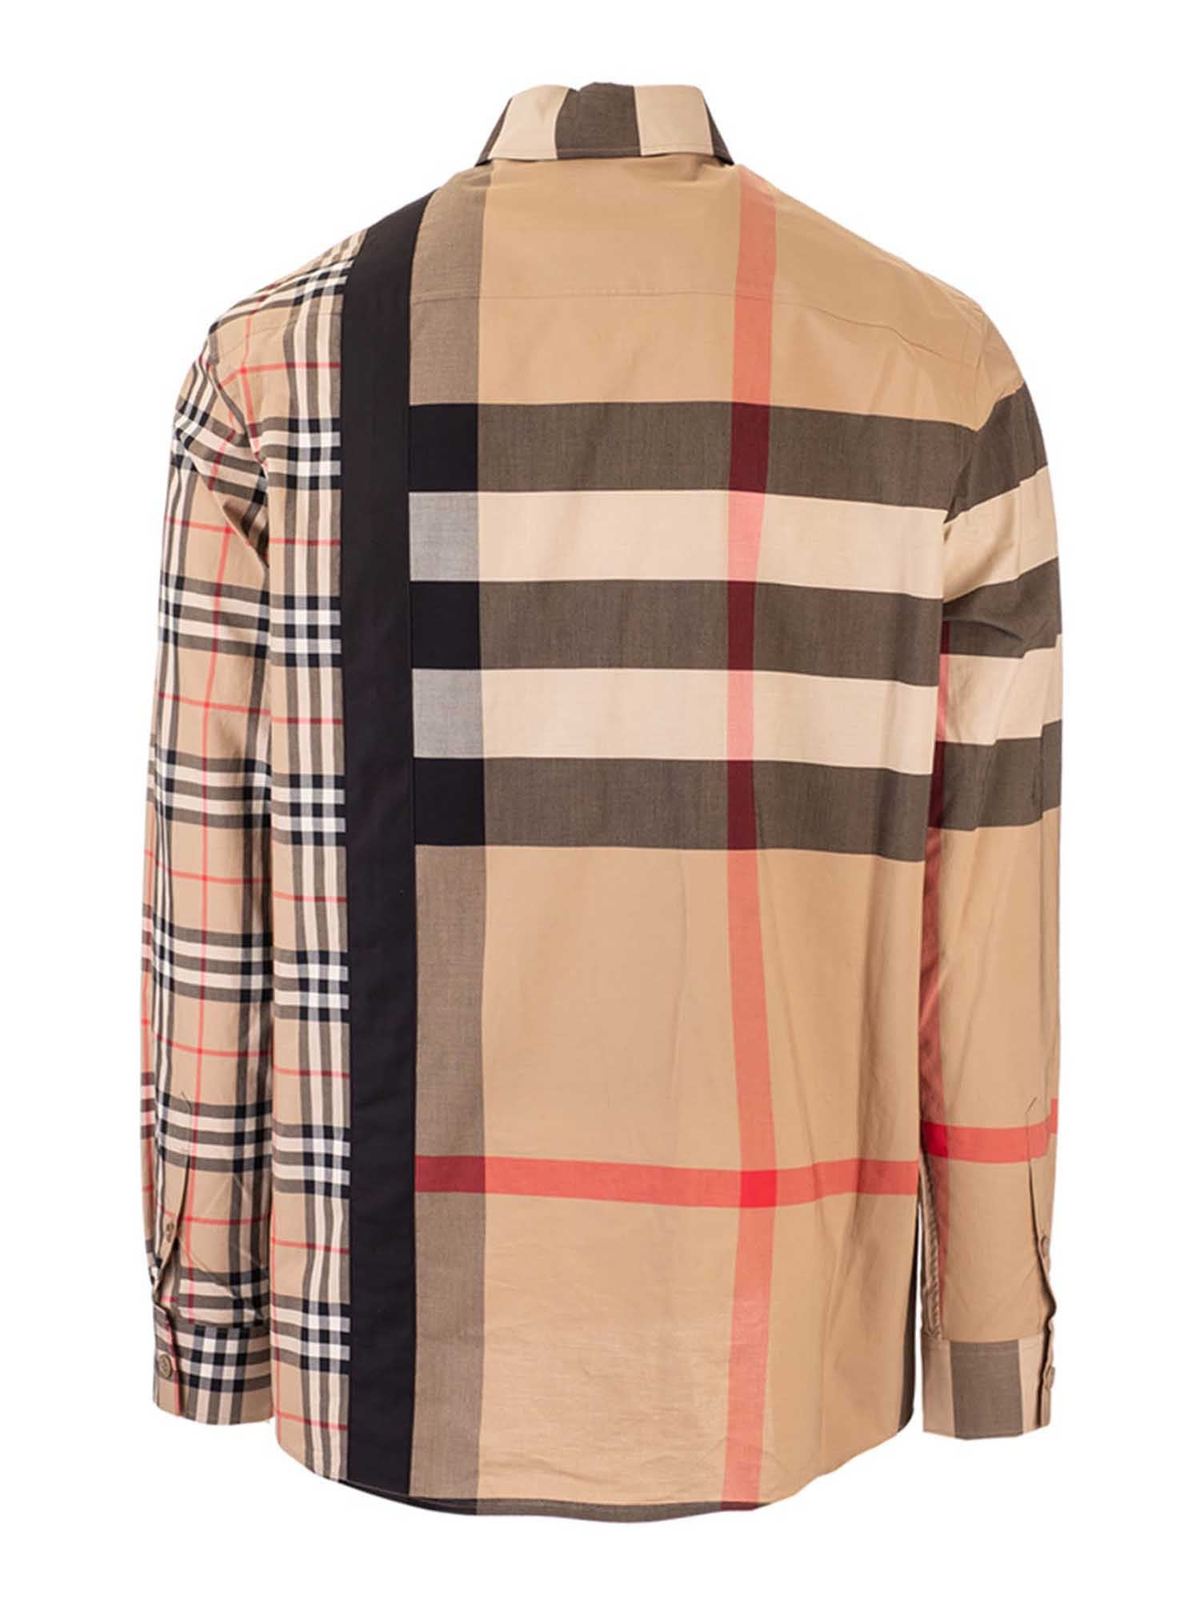 Burberry - Patchwork check and logo shirt in beige - shirts - 8033101